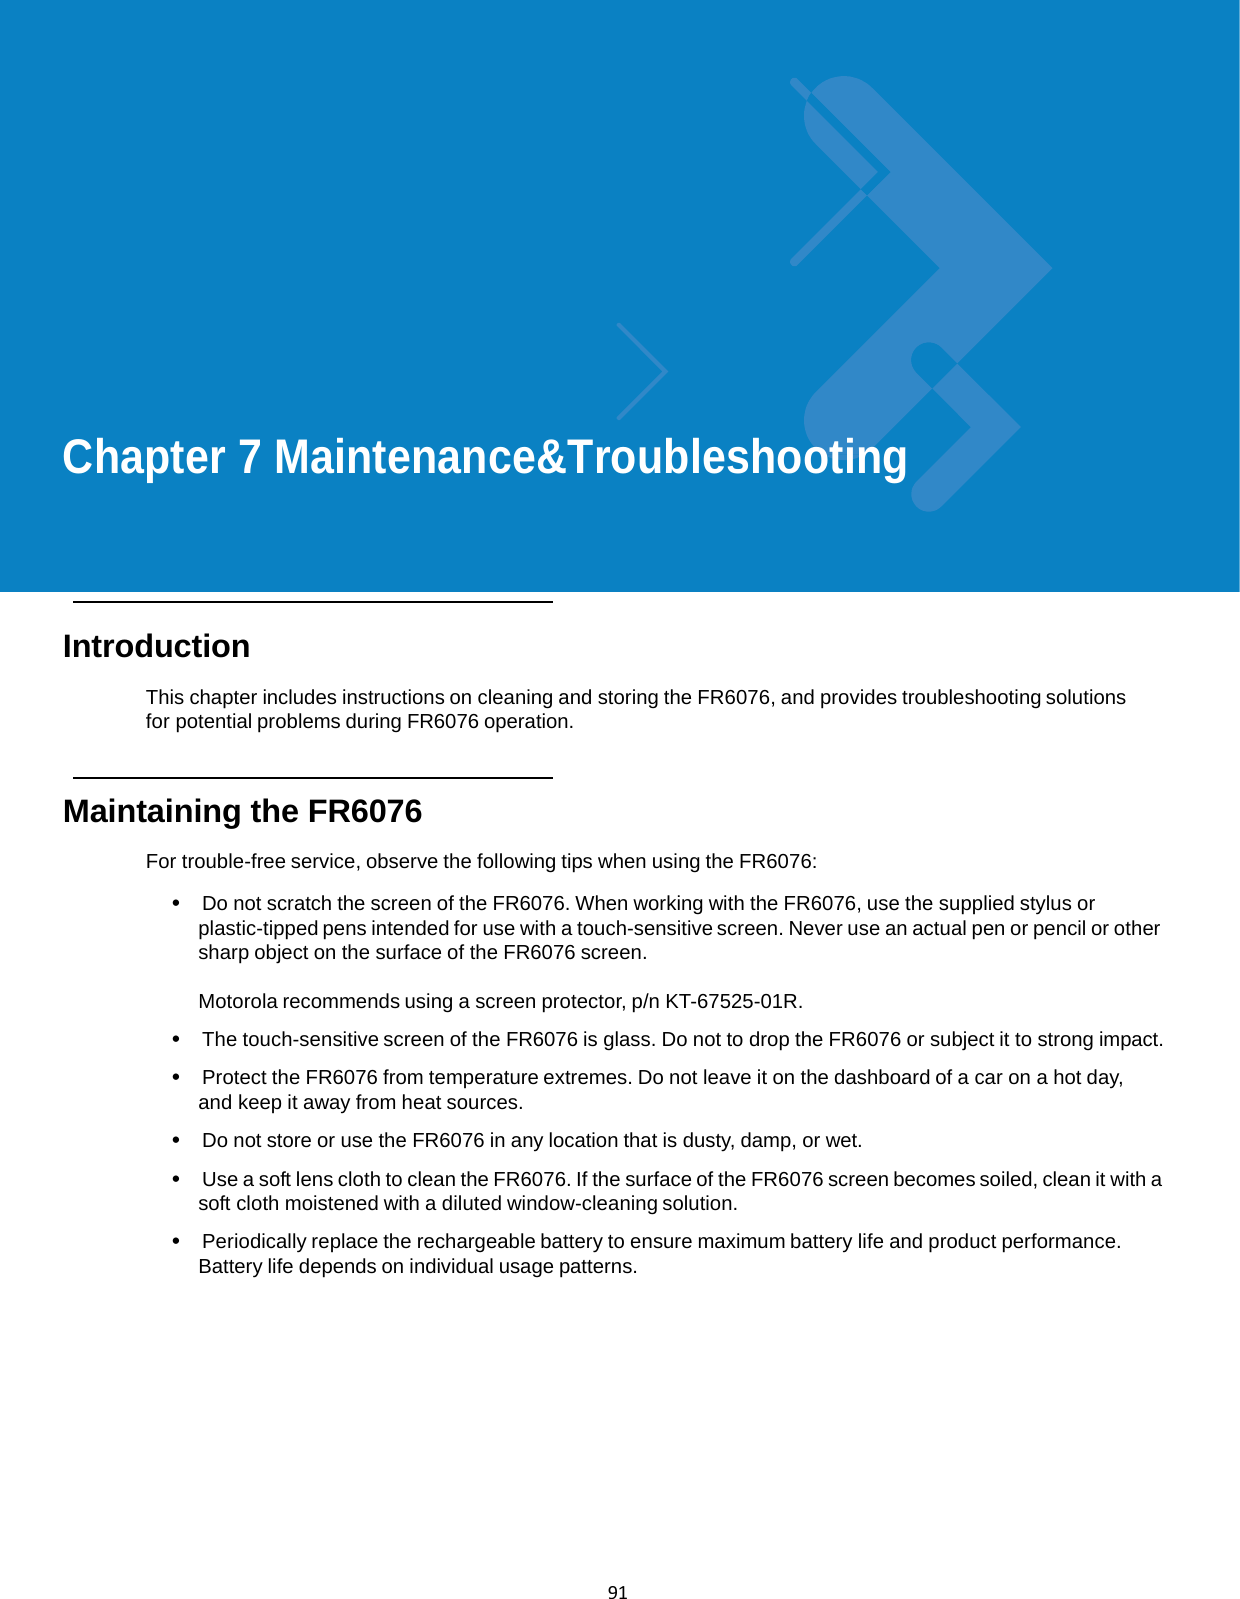  91             Chapter 7 Maintenance&amp;Troubleshooting       Introduction  This chapter includes instructions on cleaning and storing the FR6076, and provides troubleshooting solutions for potential problems during FR6076 operation.    Maintaining the FR6076  For trouble-free service, observe the following tips when using the FR6076:  •  Do not scratch the screen of the FR6076. When working with the FR6076, use the supplied stylus or plastic-tipped pens intended for use with a touch-sensitive screen. Never use an actual pen or pencil or other sharp object on the surface of the FR6076 screen.  Motorola recommends using a screen protector, p/n KT-67525-01R.  •  The touch-sensitive screen of the FR6076 is glass. Do not to drop the FR6076 or subject it to strong impact.  •  Protect the FR6076 from temperature extremes. Do not leave it on the dashboard of a car on a hot day, and keep it away from heat sources.  •  Do not store or use the FR6076 in any location that is dusty, damp, or wet.  •  Use a soft lens cloth to clean the FR6076. If the surface of the FR6076 screen becomes soiled, clean it with a soft cloth moistened with a diluted window-cleaning solution.  •  Periodically replace the rechargeable battery to ensure maximum battery life and product performance. Battery life depends on individual usage patterns. 